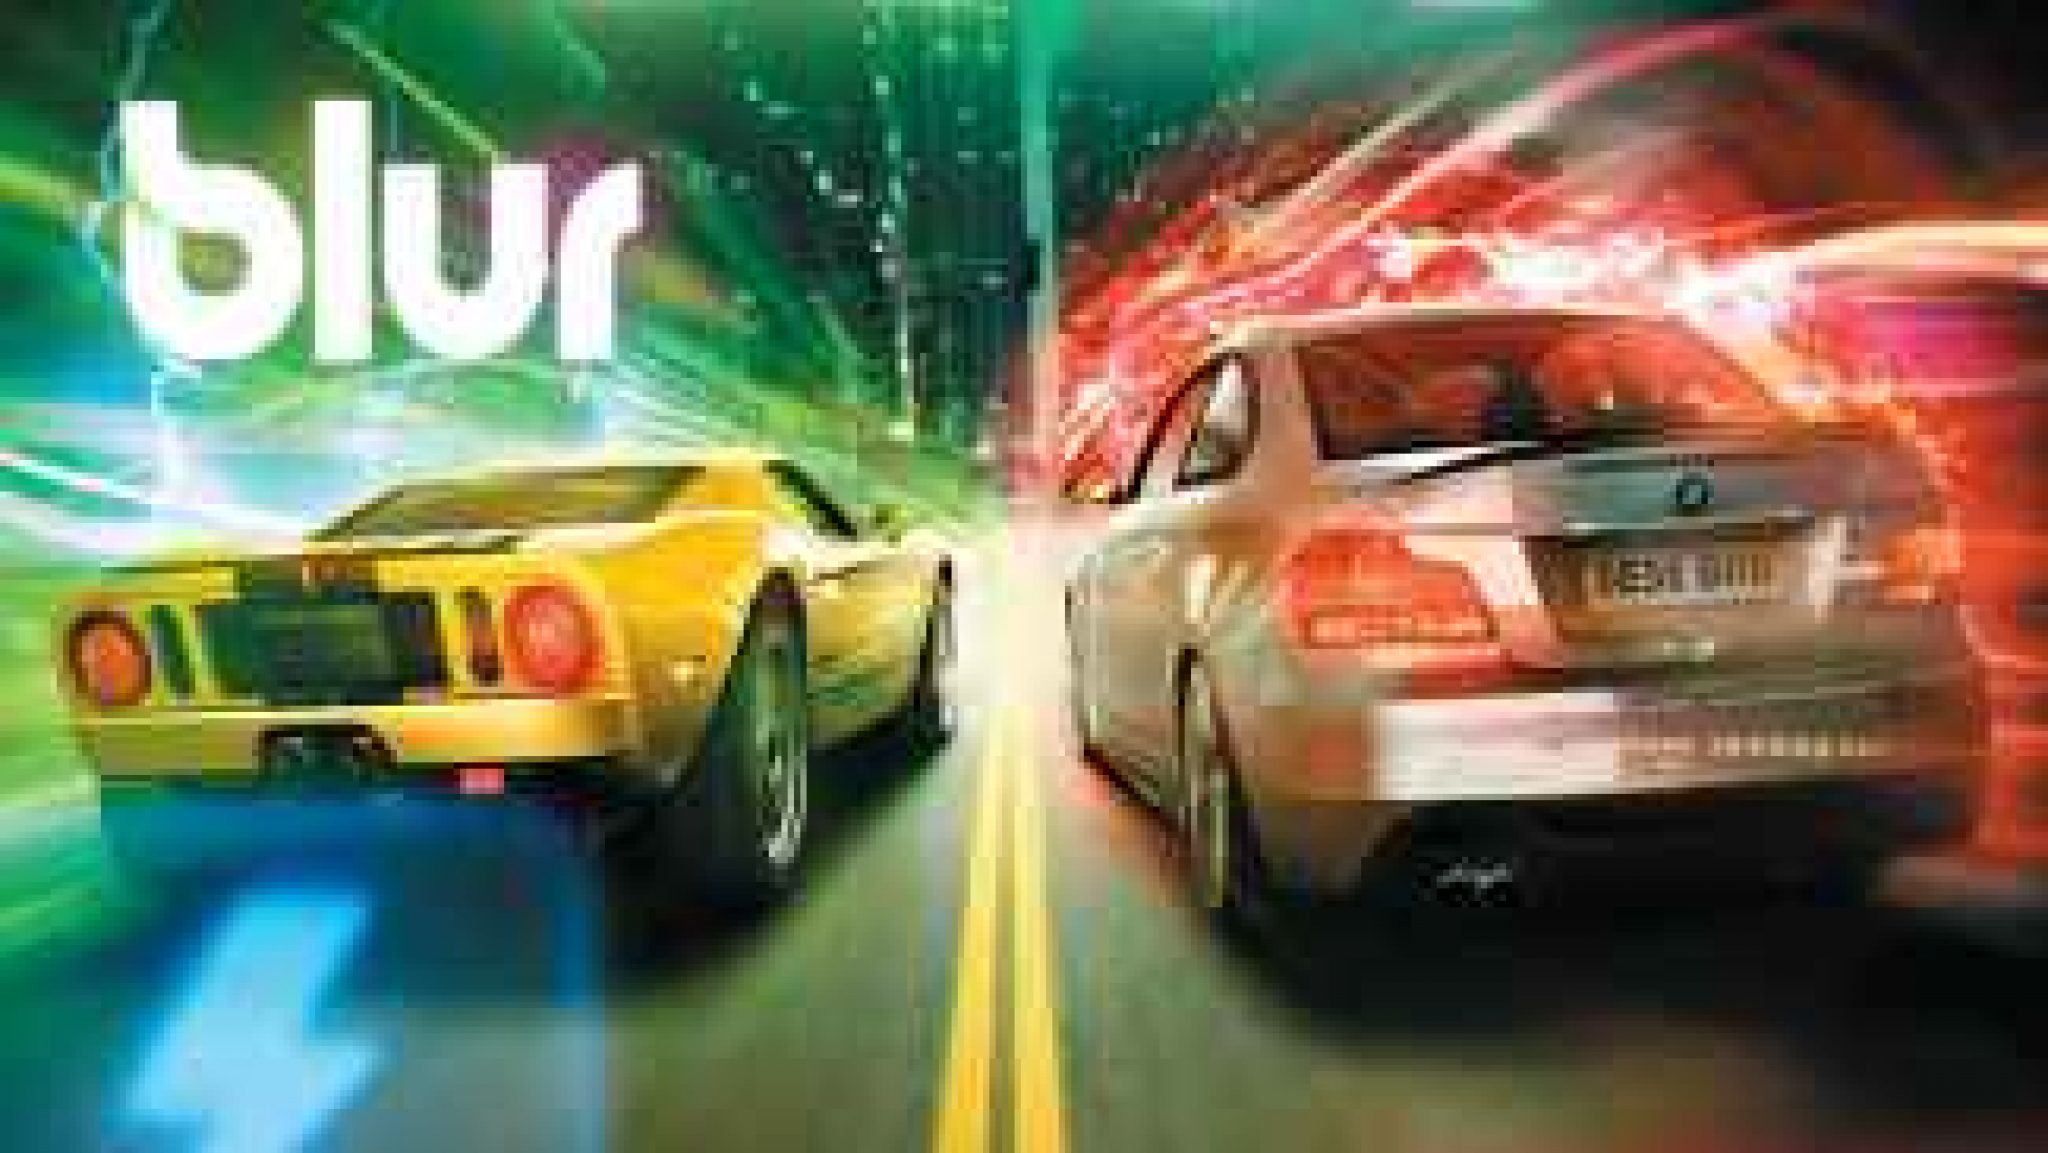 blur ppsspp game download file